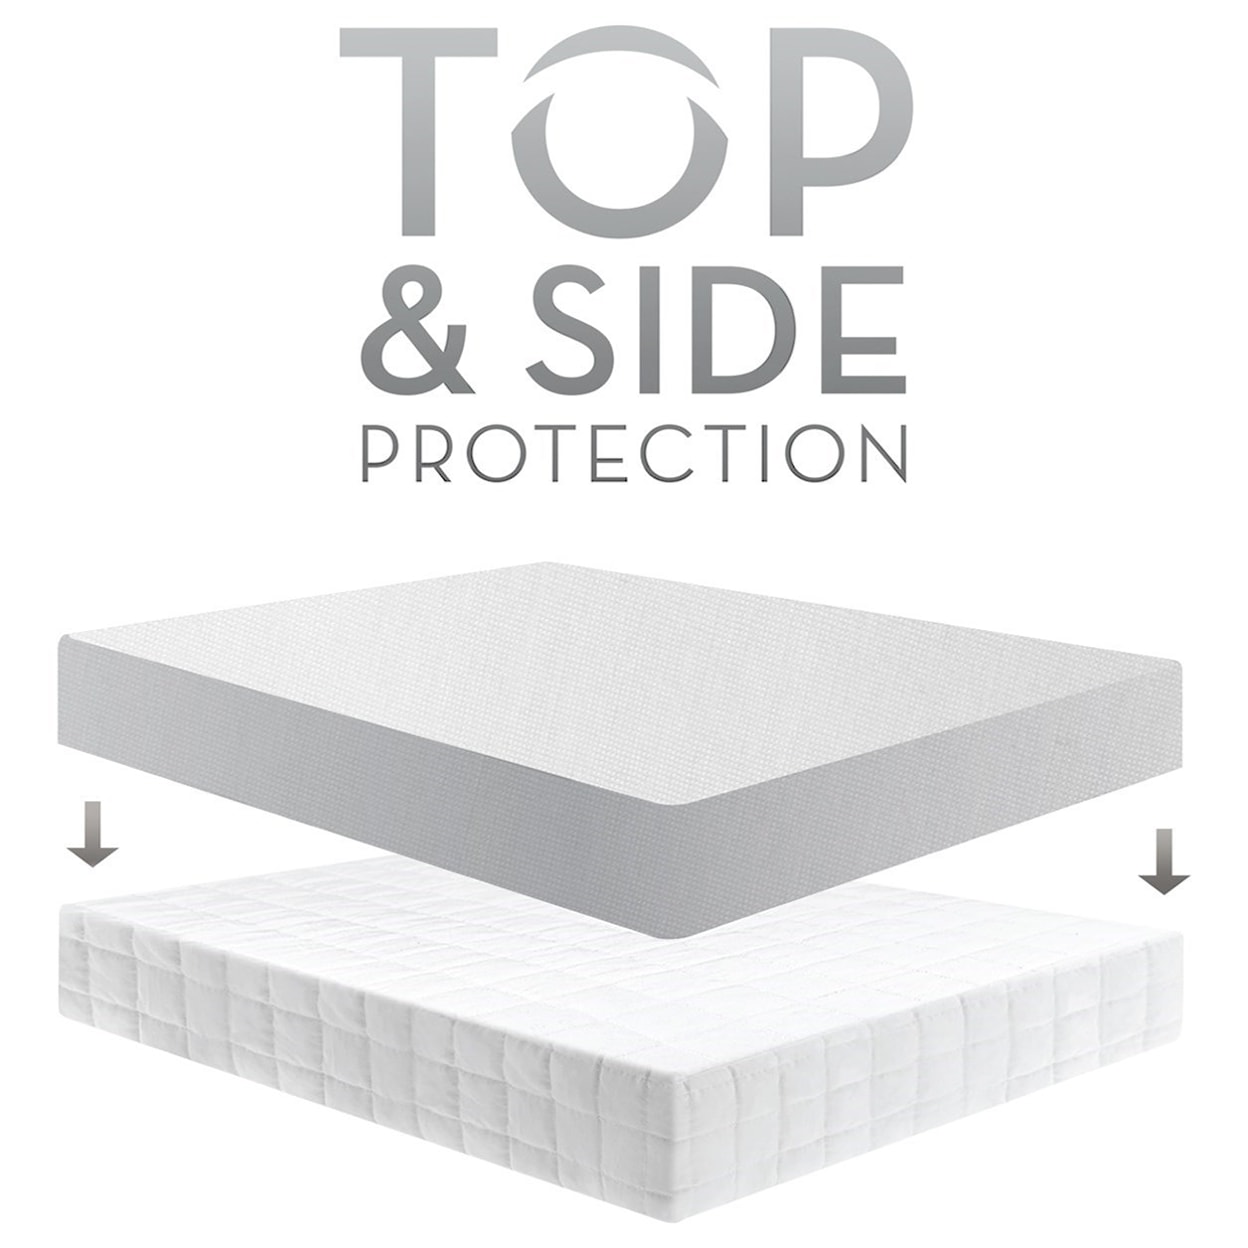 Malouf Omniphase Full XL Five 5ided Mattress Protector